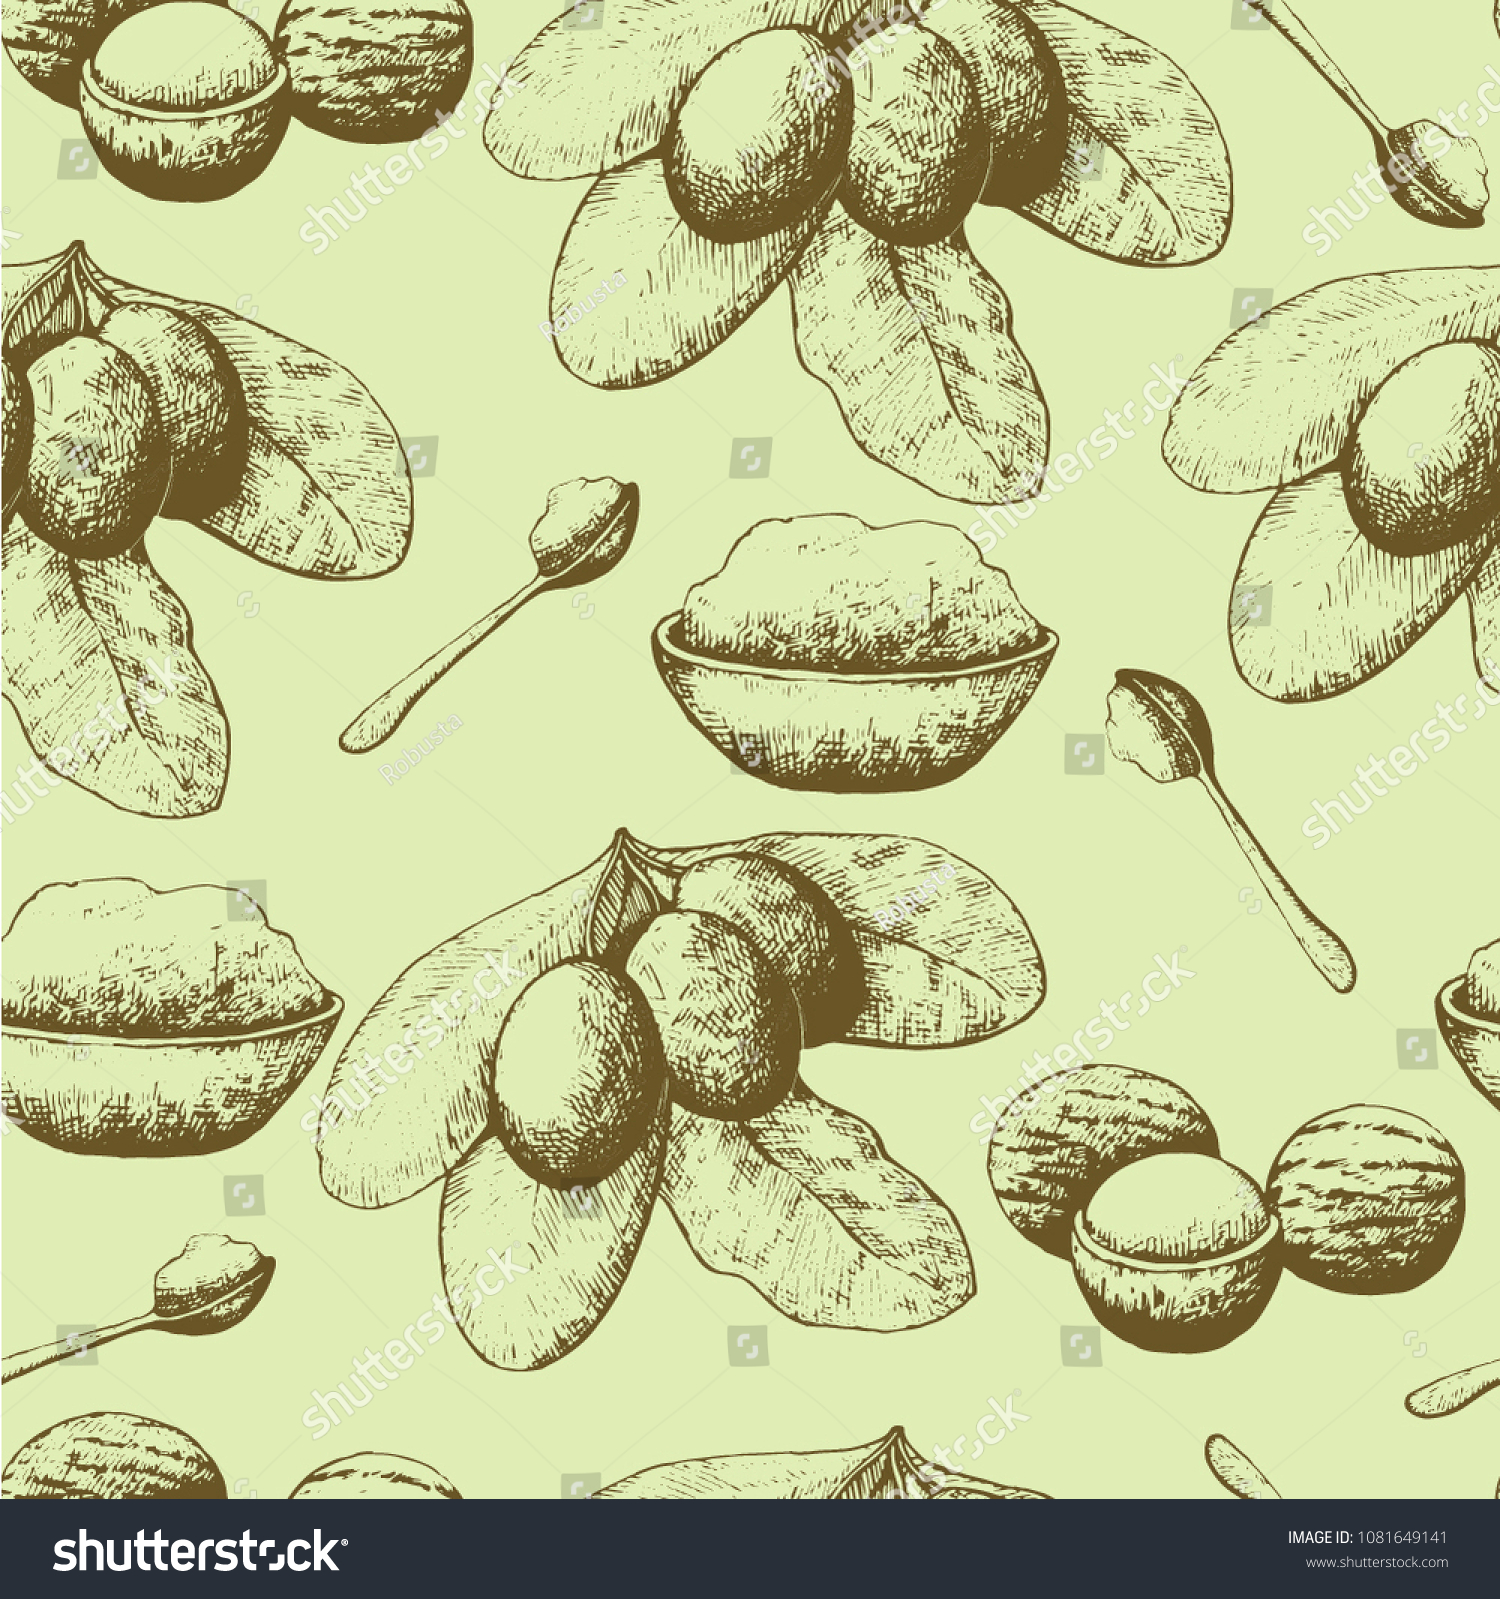 SVG of Shea nuts and butter set. Hand drawn seamless pattern svg